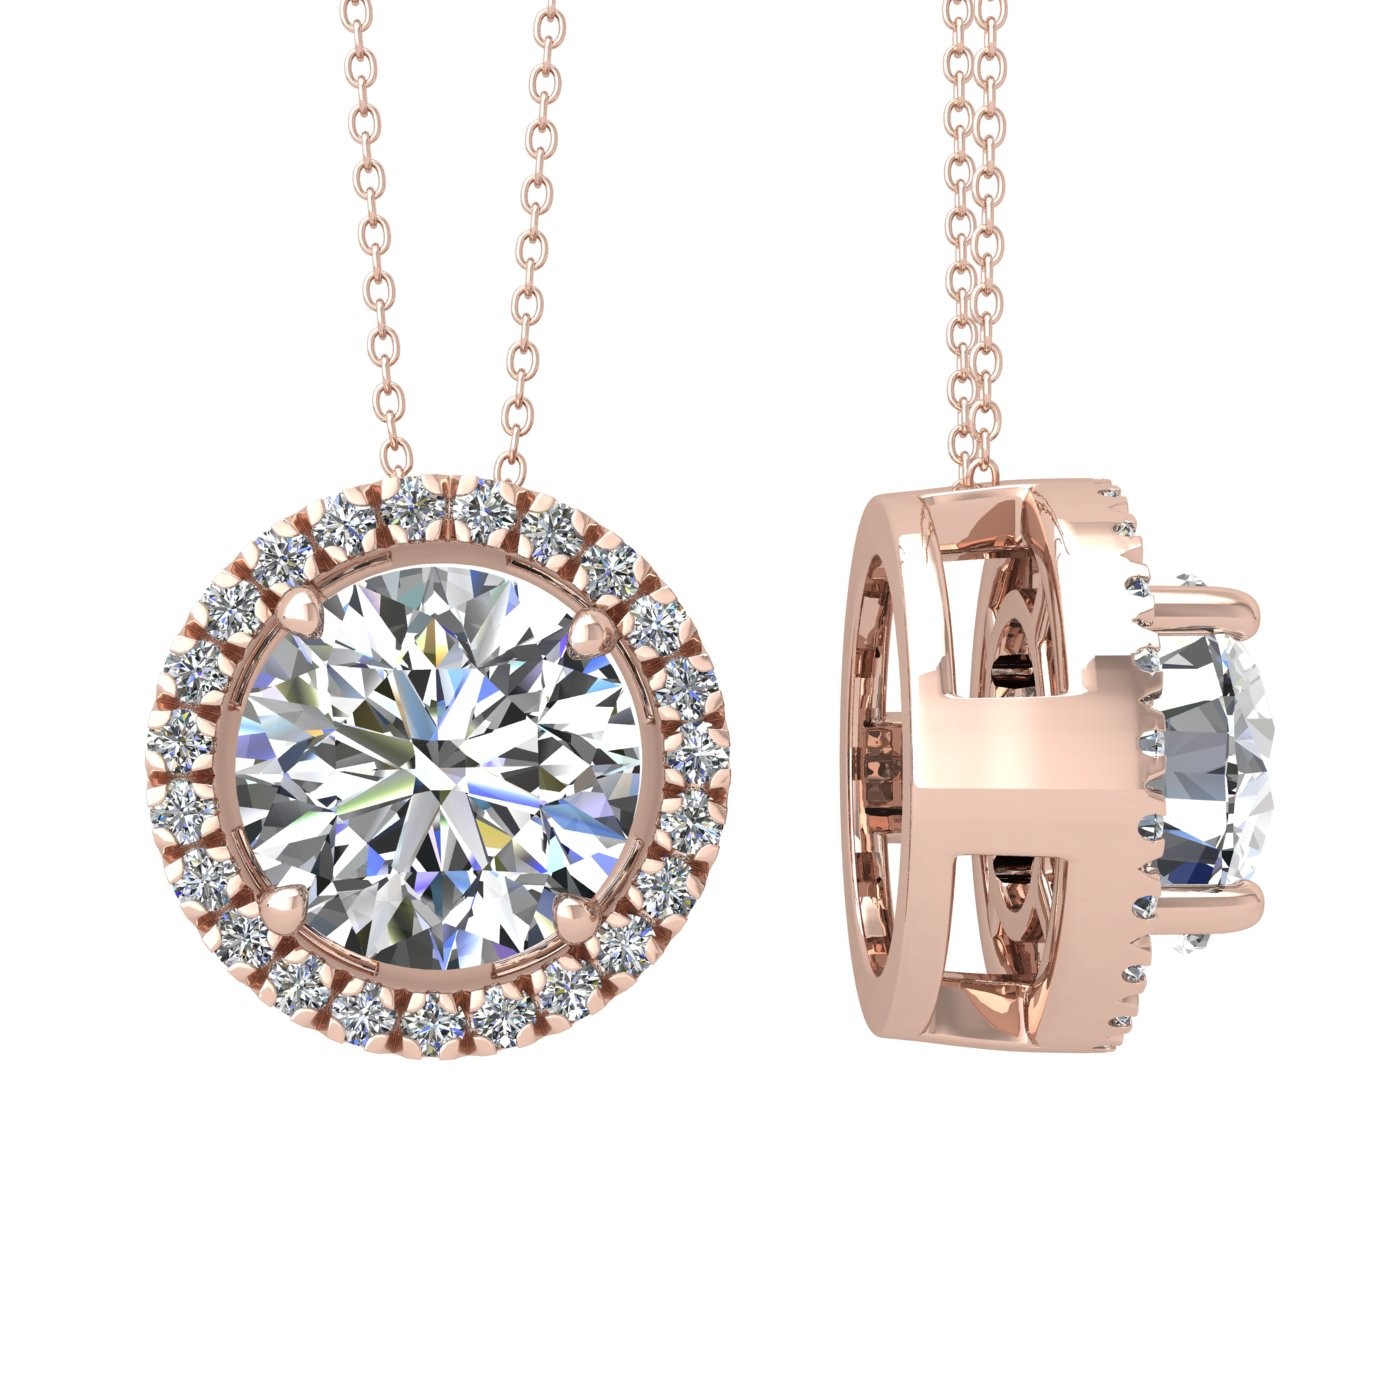 18k rose gold 1,5 ct 4 prong round shape diamond pendant with diamond pavÉ set halo including chain seperate from the pendant Photos & images